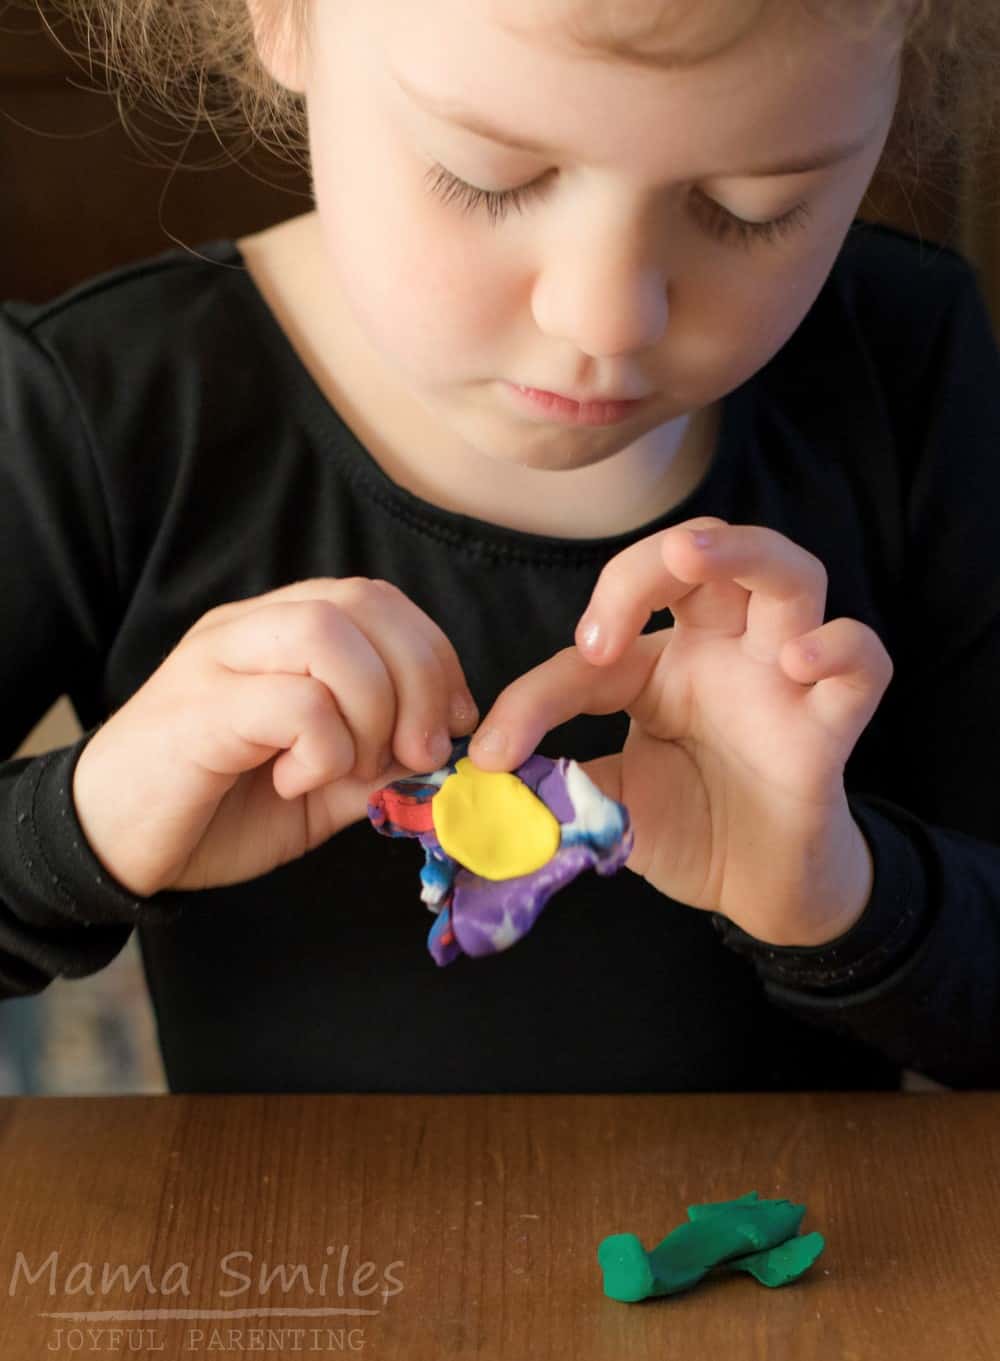 This gluten free air dry modeling clay from Sargent Art is easy for kids to use. We love the vibrant colors!